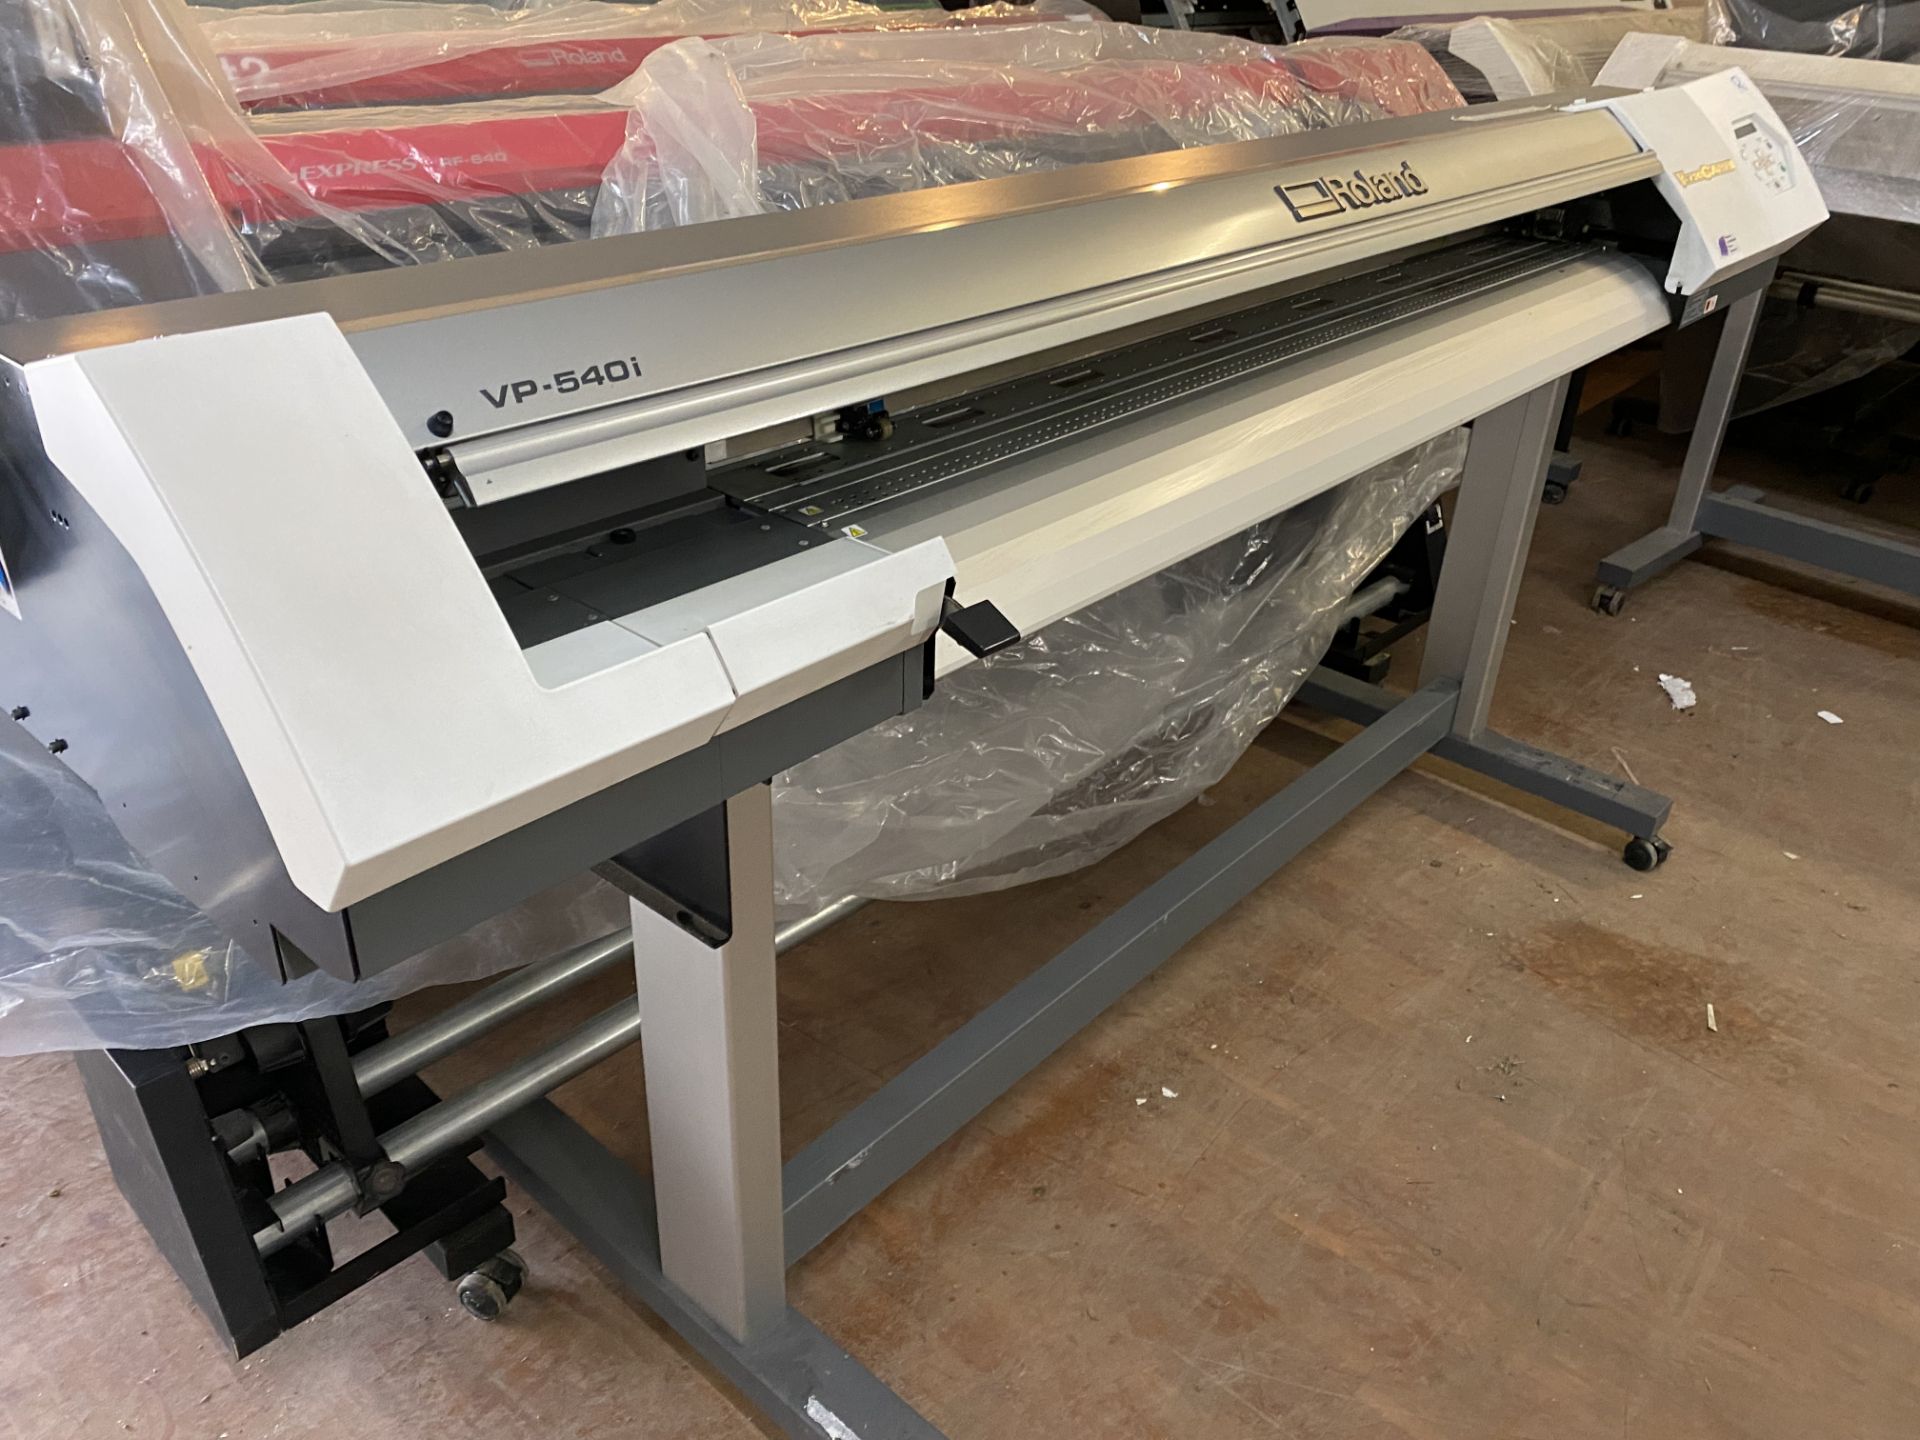 (R14) Roland VP540i Eco Solvent Print And Cut Large Format Printer - Image 3 of 3